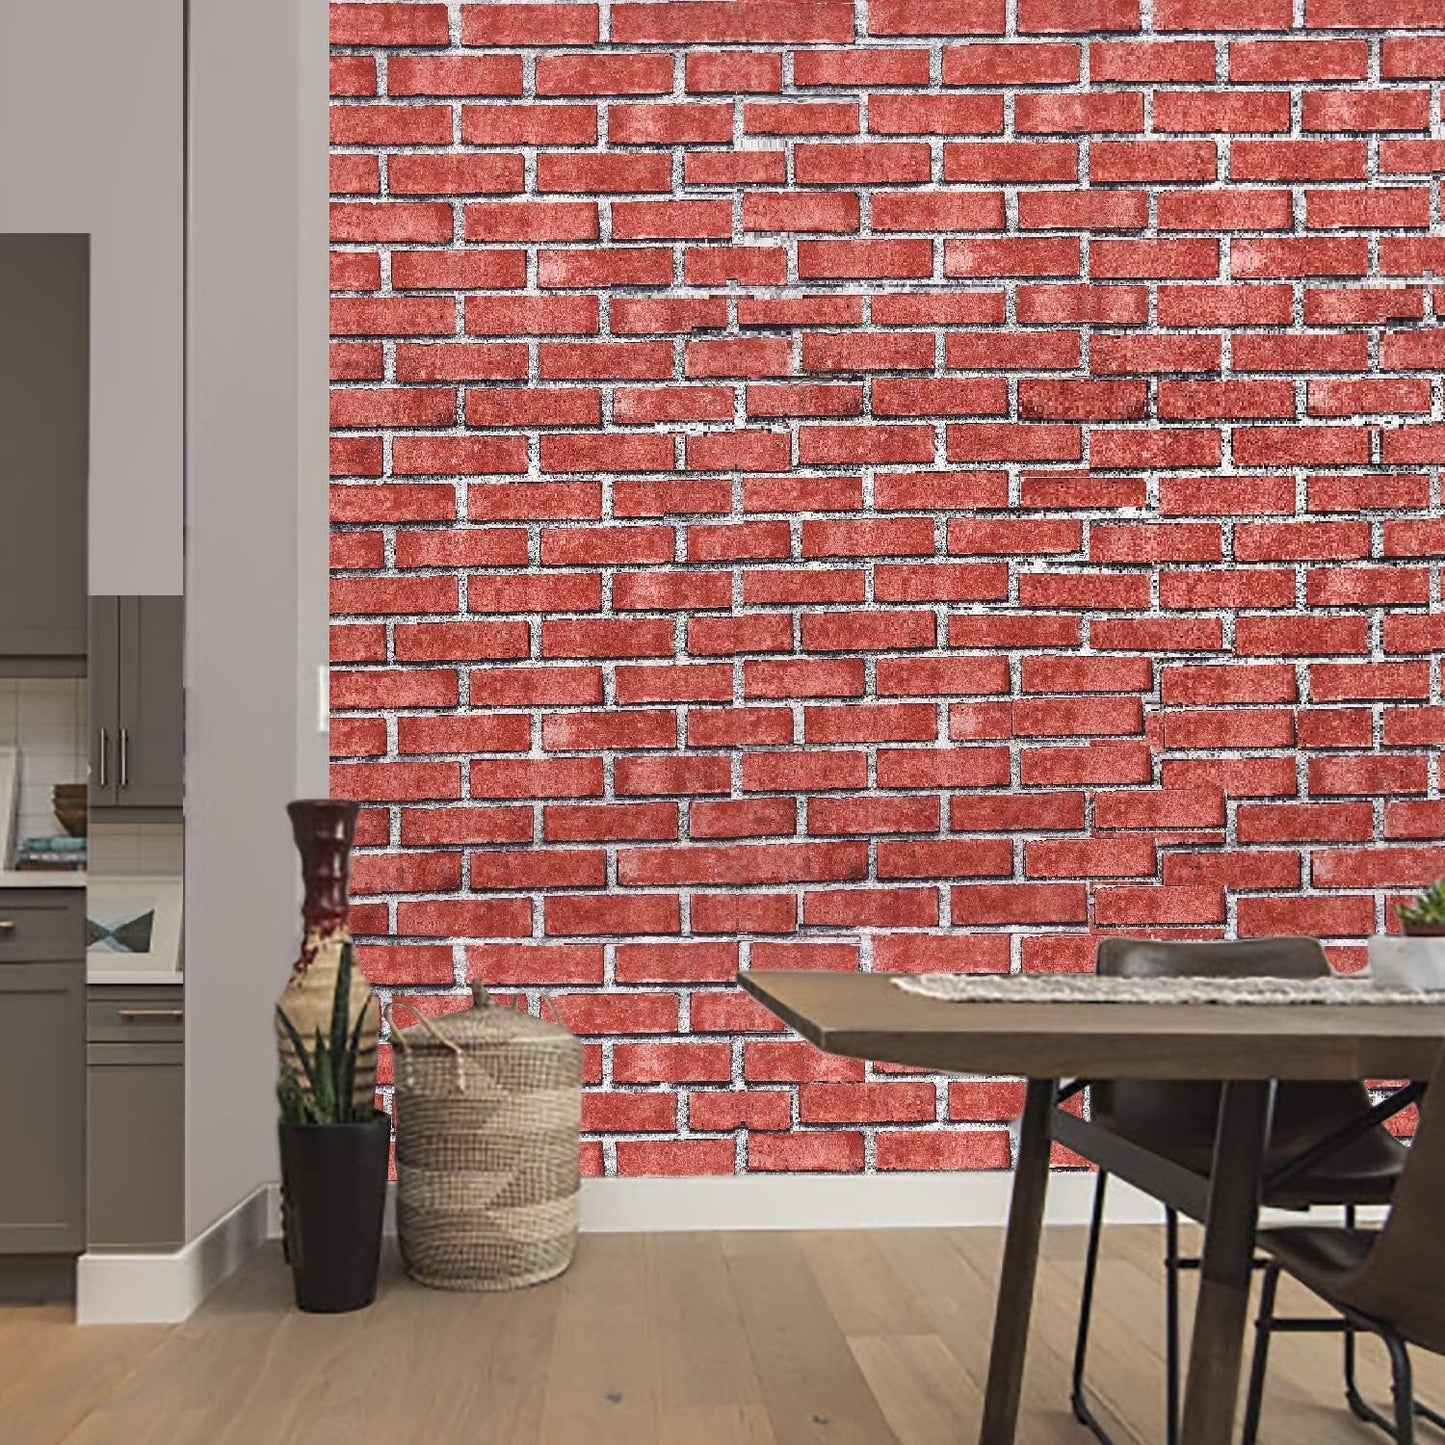 3D Latest Brick Design Red Wallpaper Roll for Home Walls 57 Sq Ft (0.53 m or 33 Feet)